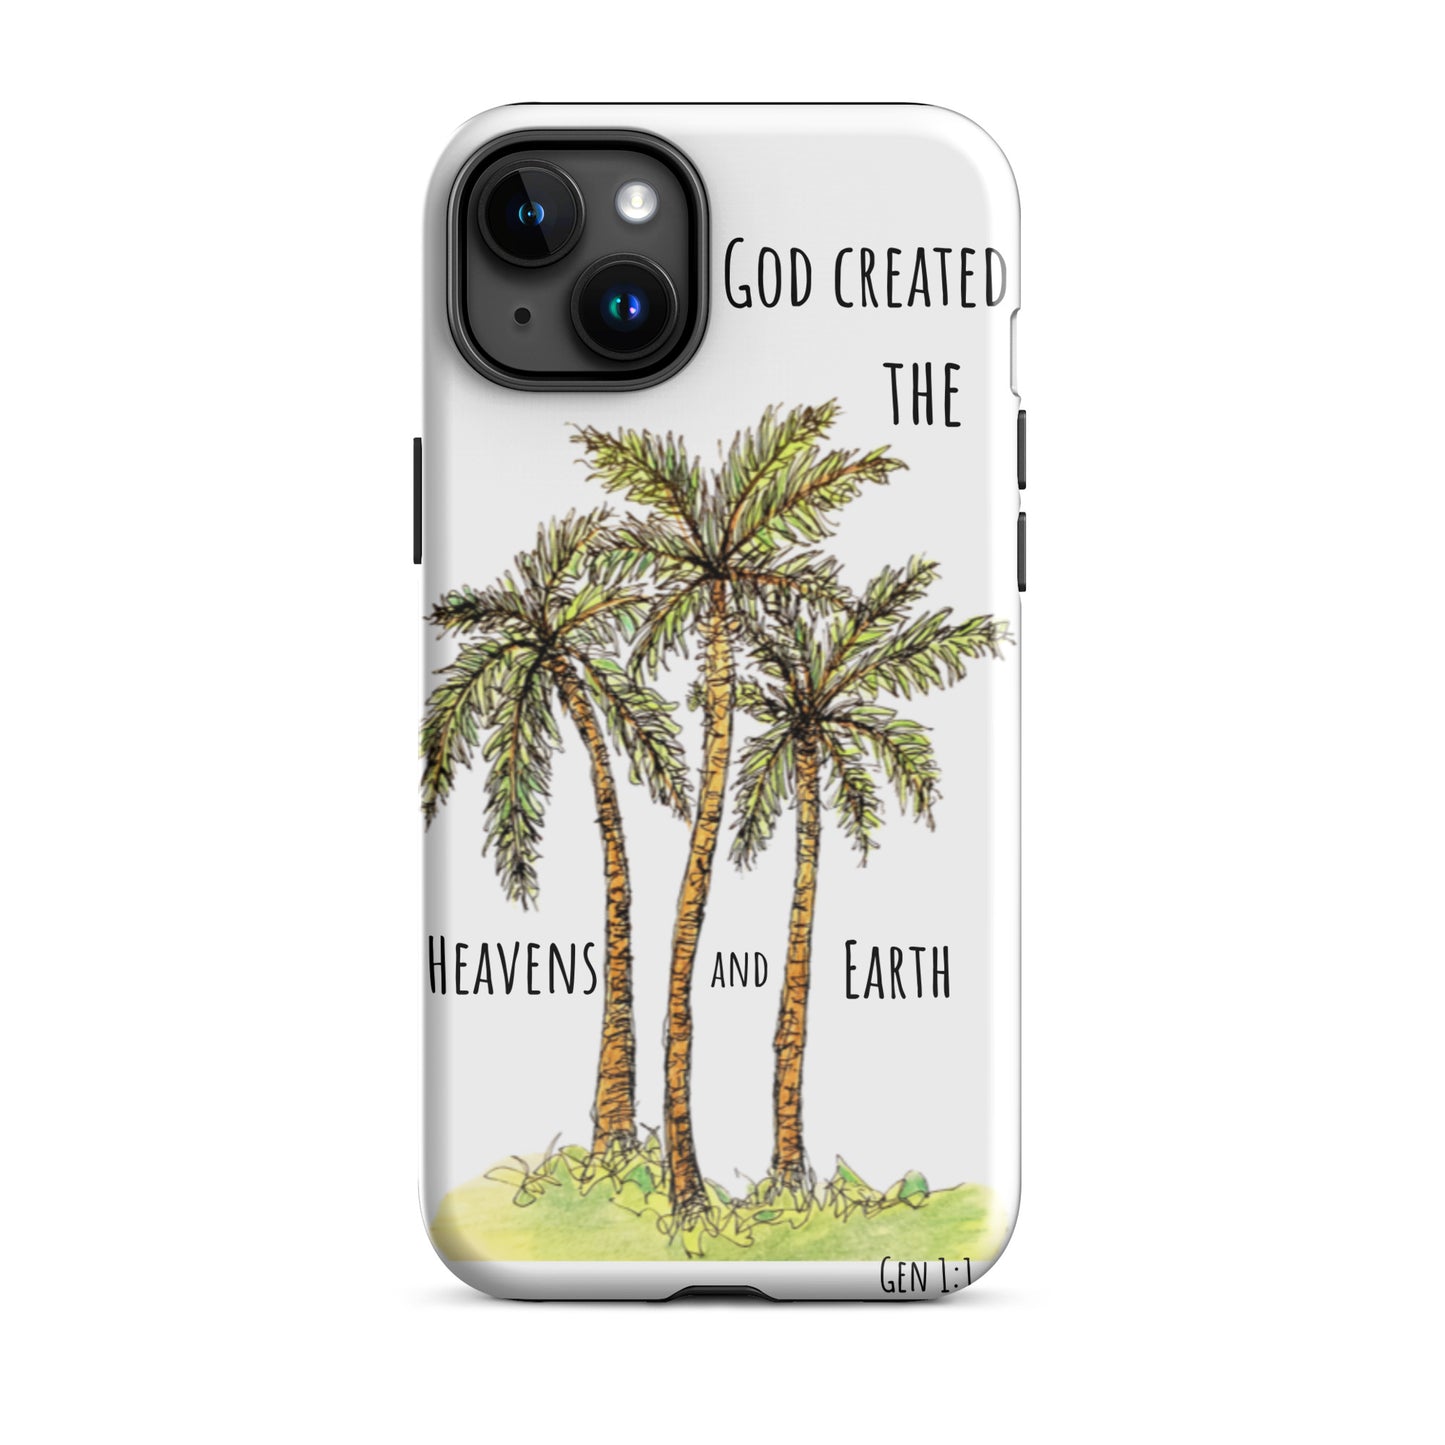 God Said "In the Beginning" Phone case